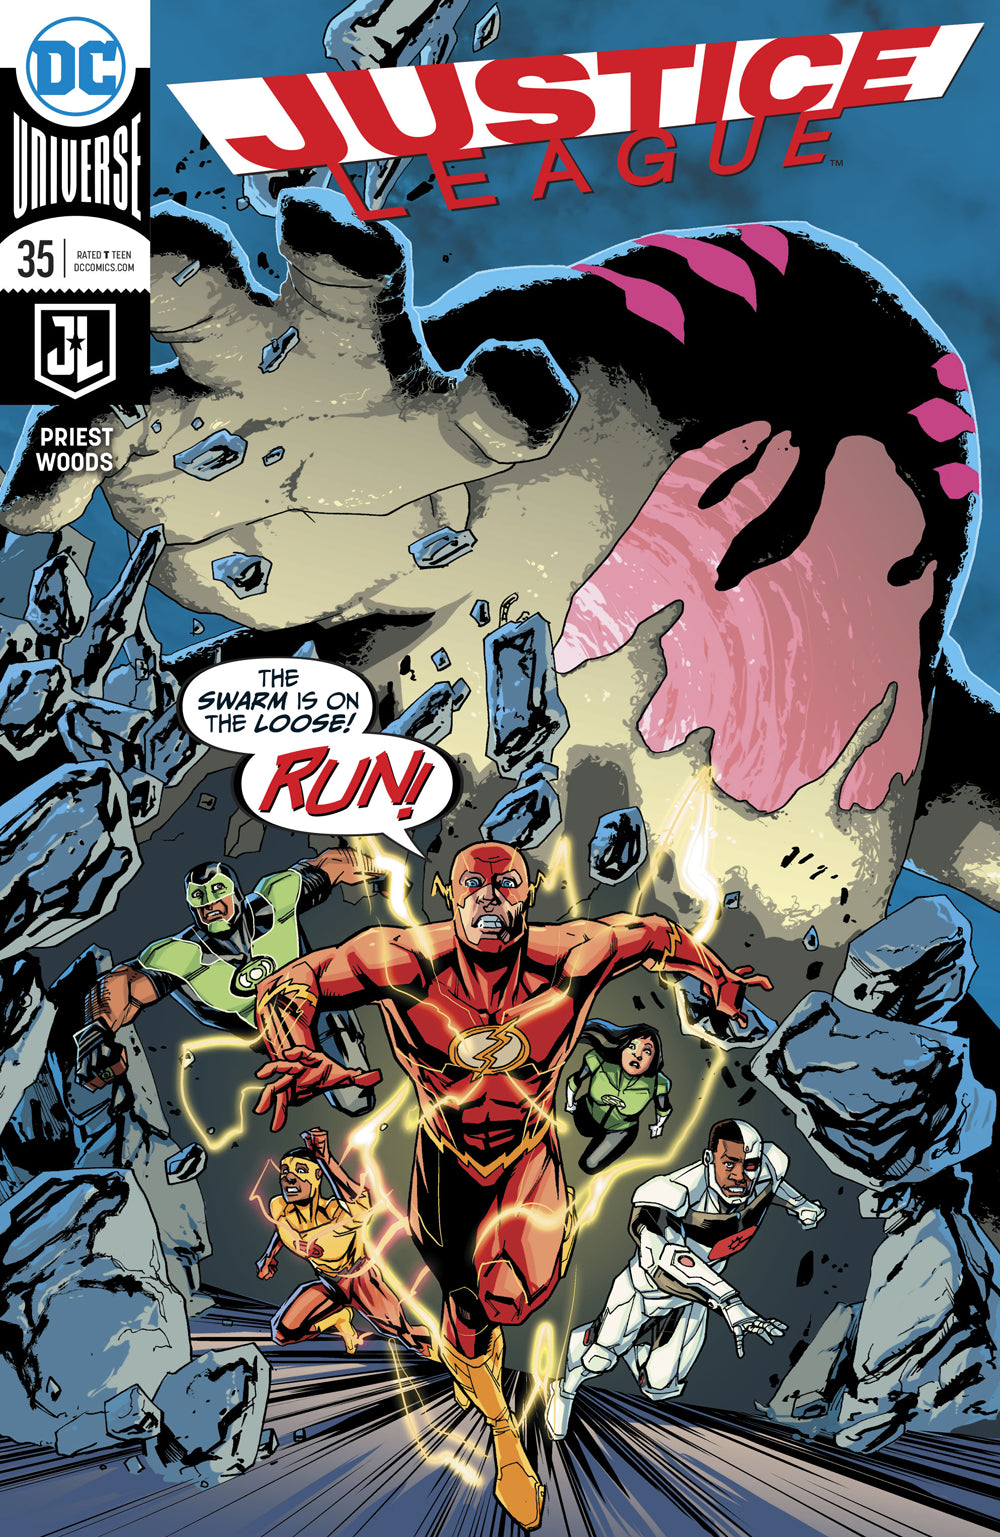 JUSTICE LEAGUE #35 | Game Master's Emporium (The New GME)